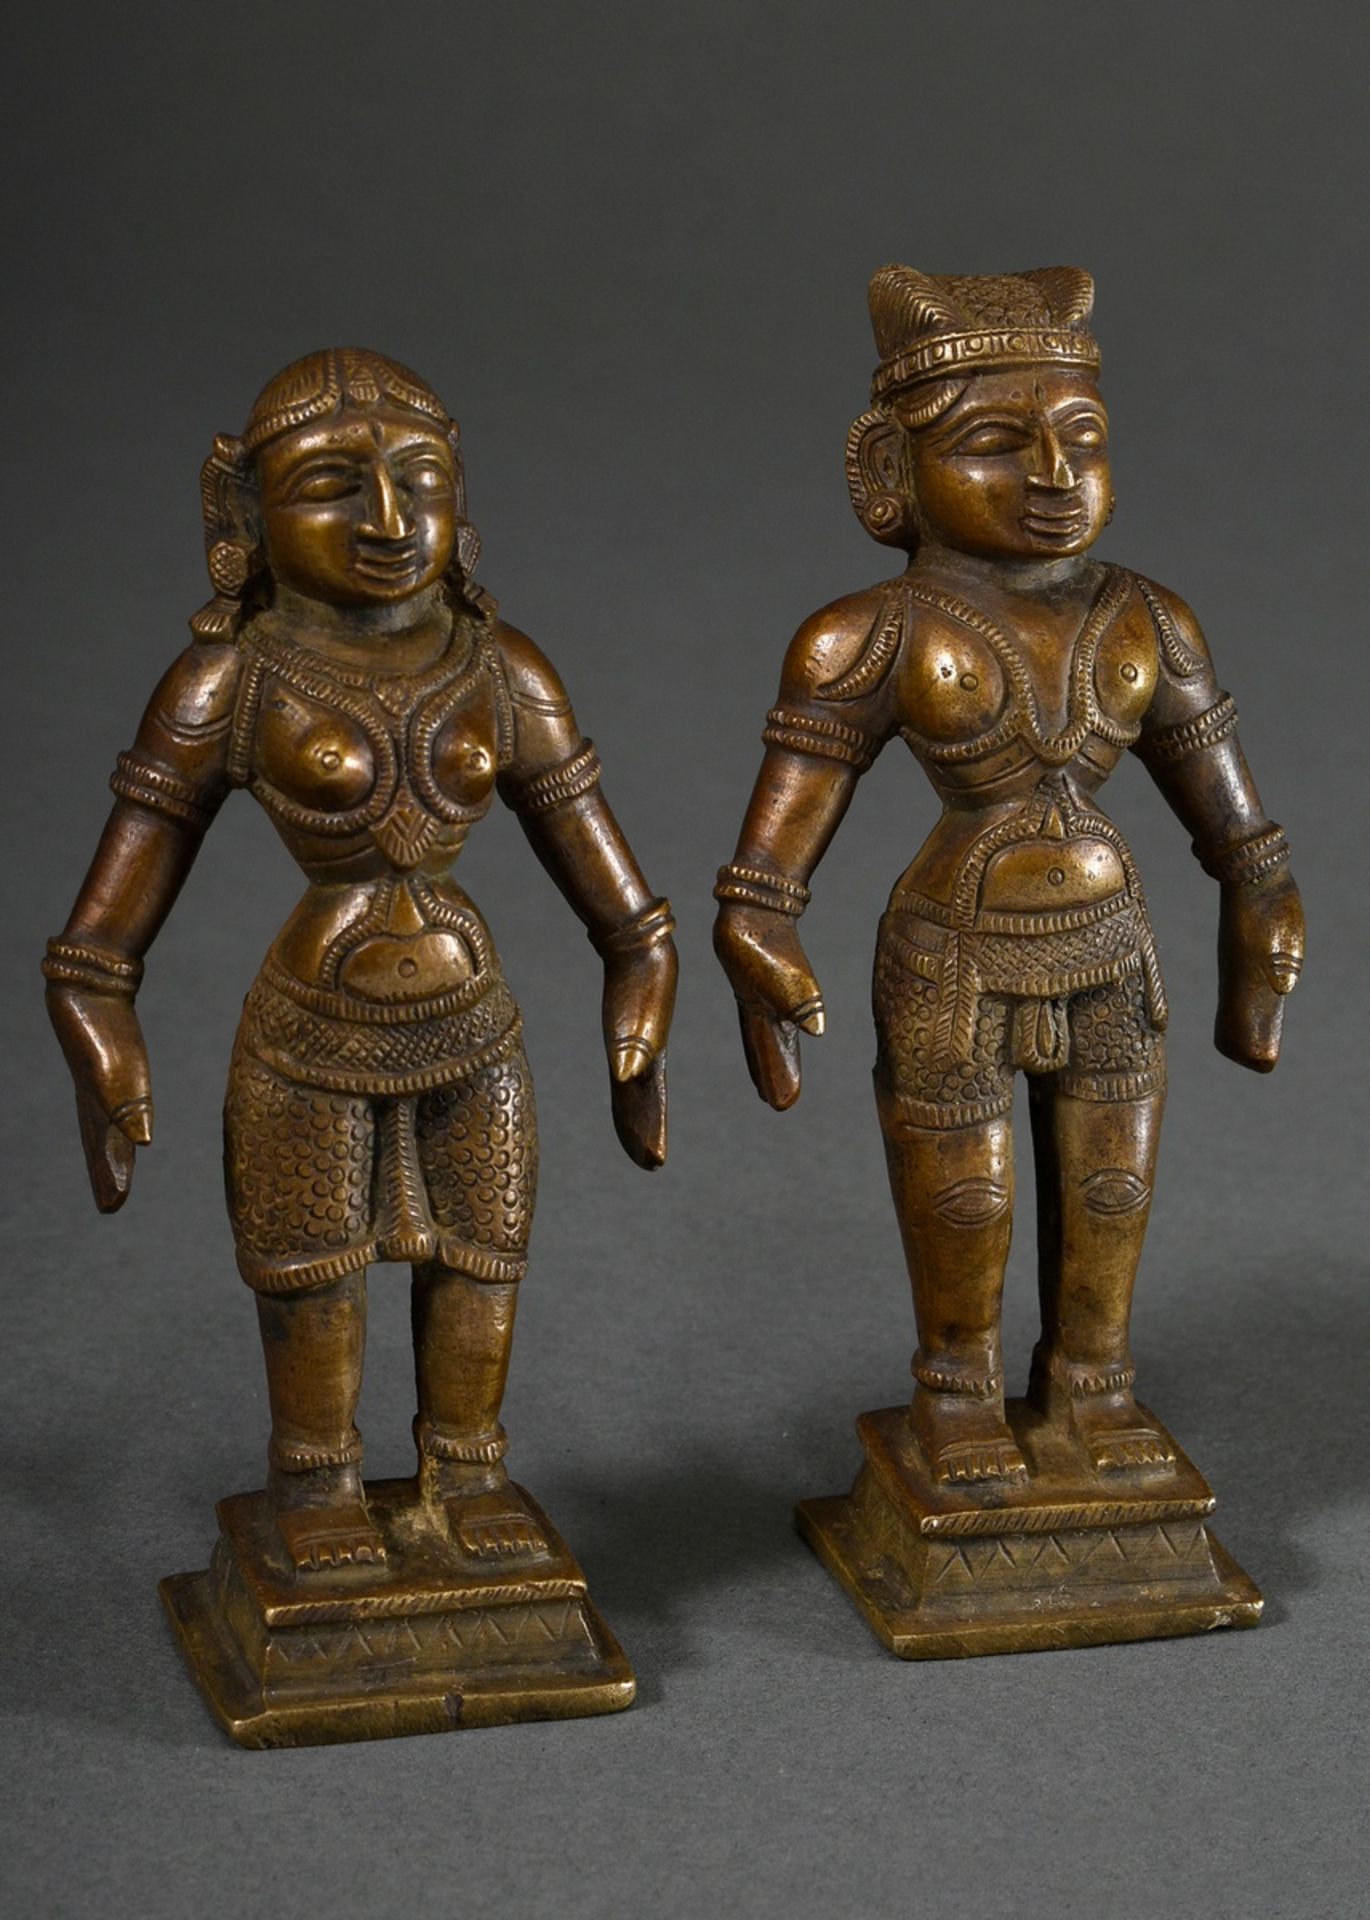 Pair of bronze figures probably "Krishna" and "Radha", India 19th/20th c., h. 10.5/11.2cm, acquired